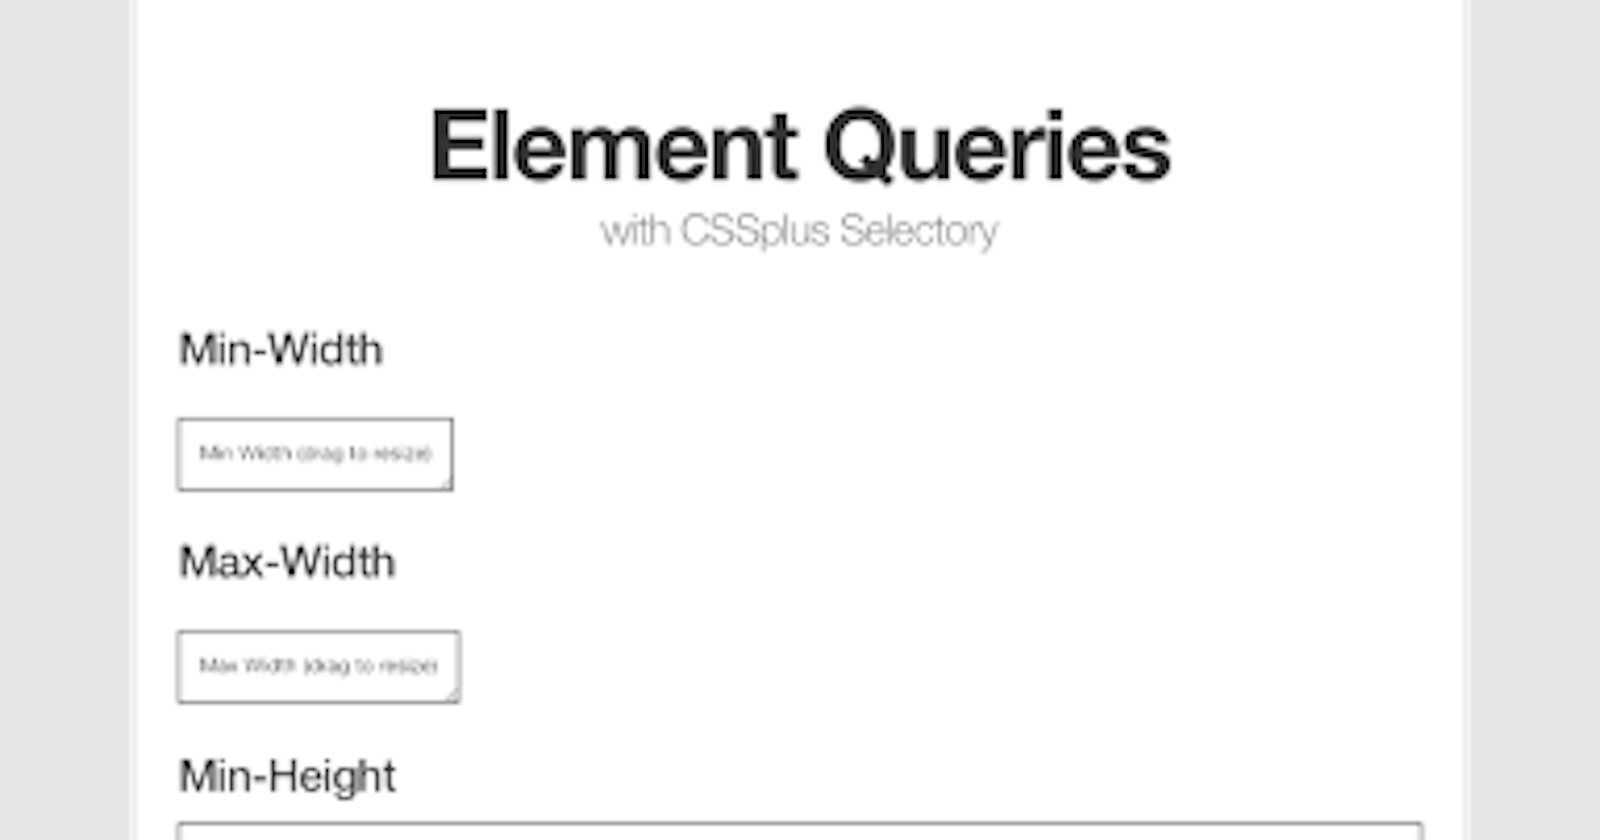 Element Queries with CSSplus/Selectory